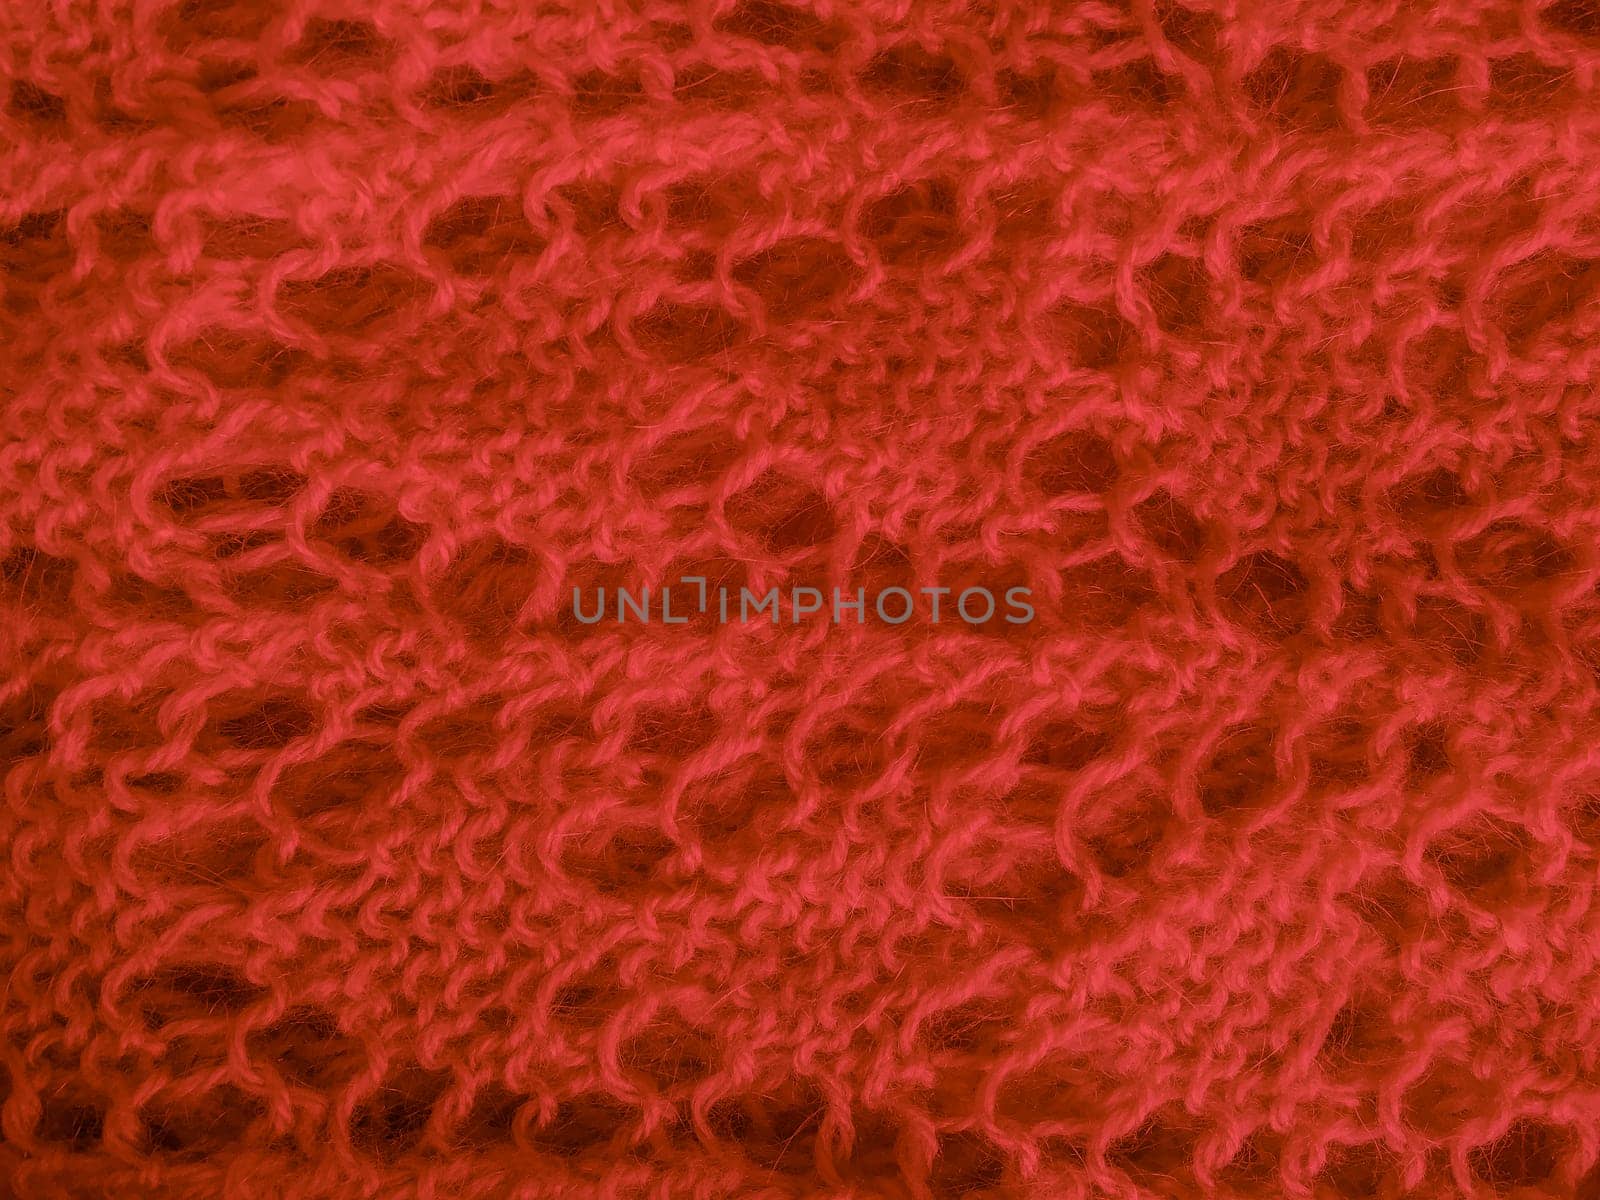 Christmas Knitted Texture. Abstract Wool Fabric. Winter Handmade Thread Garment. Xmas Knitted Background. Organic Weave Carpet. Cotton Nordic Material. Red Christmas Knitting Pattern.